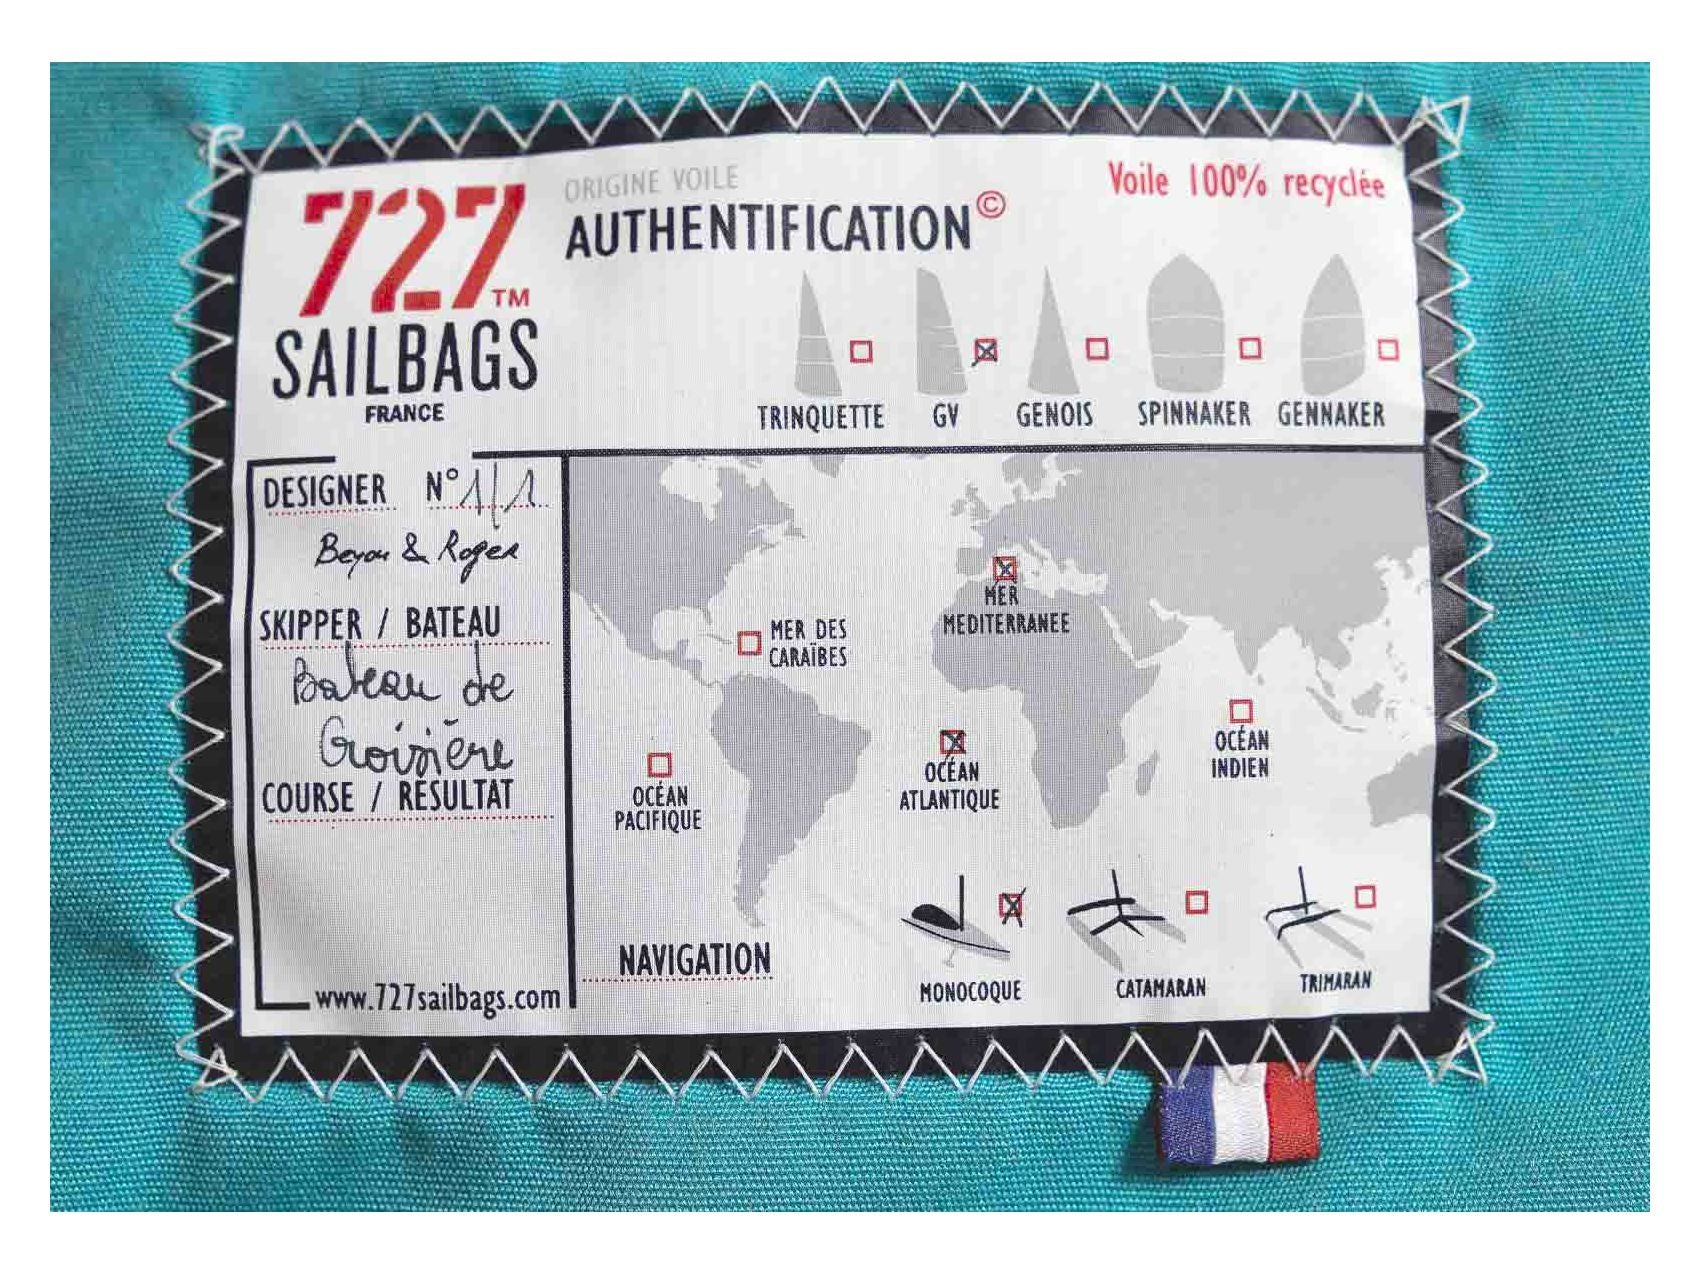 727 Sailbags | Filled Maxi Bean Bag | Sail & Marine-Grade Canvas  | White & Light Blue | Size 140cm x 140cm | FILLING + AUCKLAND METRO DELIVERY INCLUDED